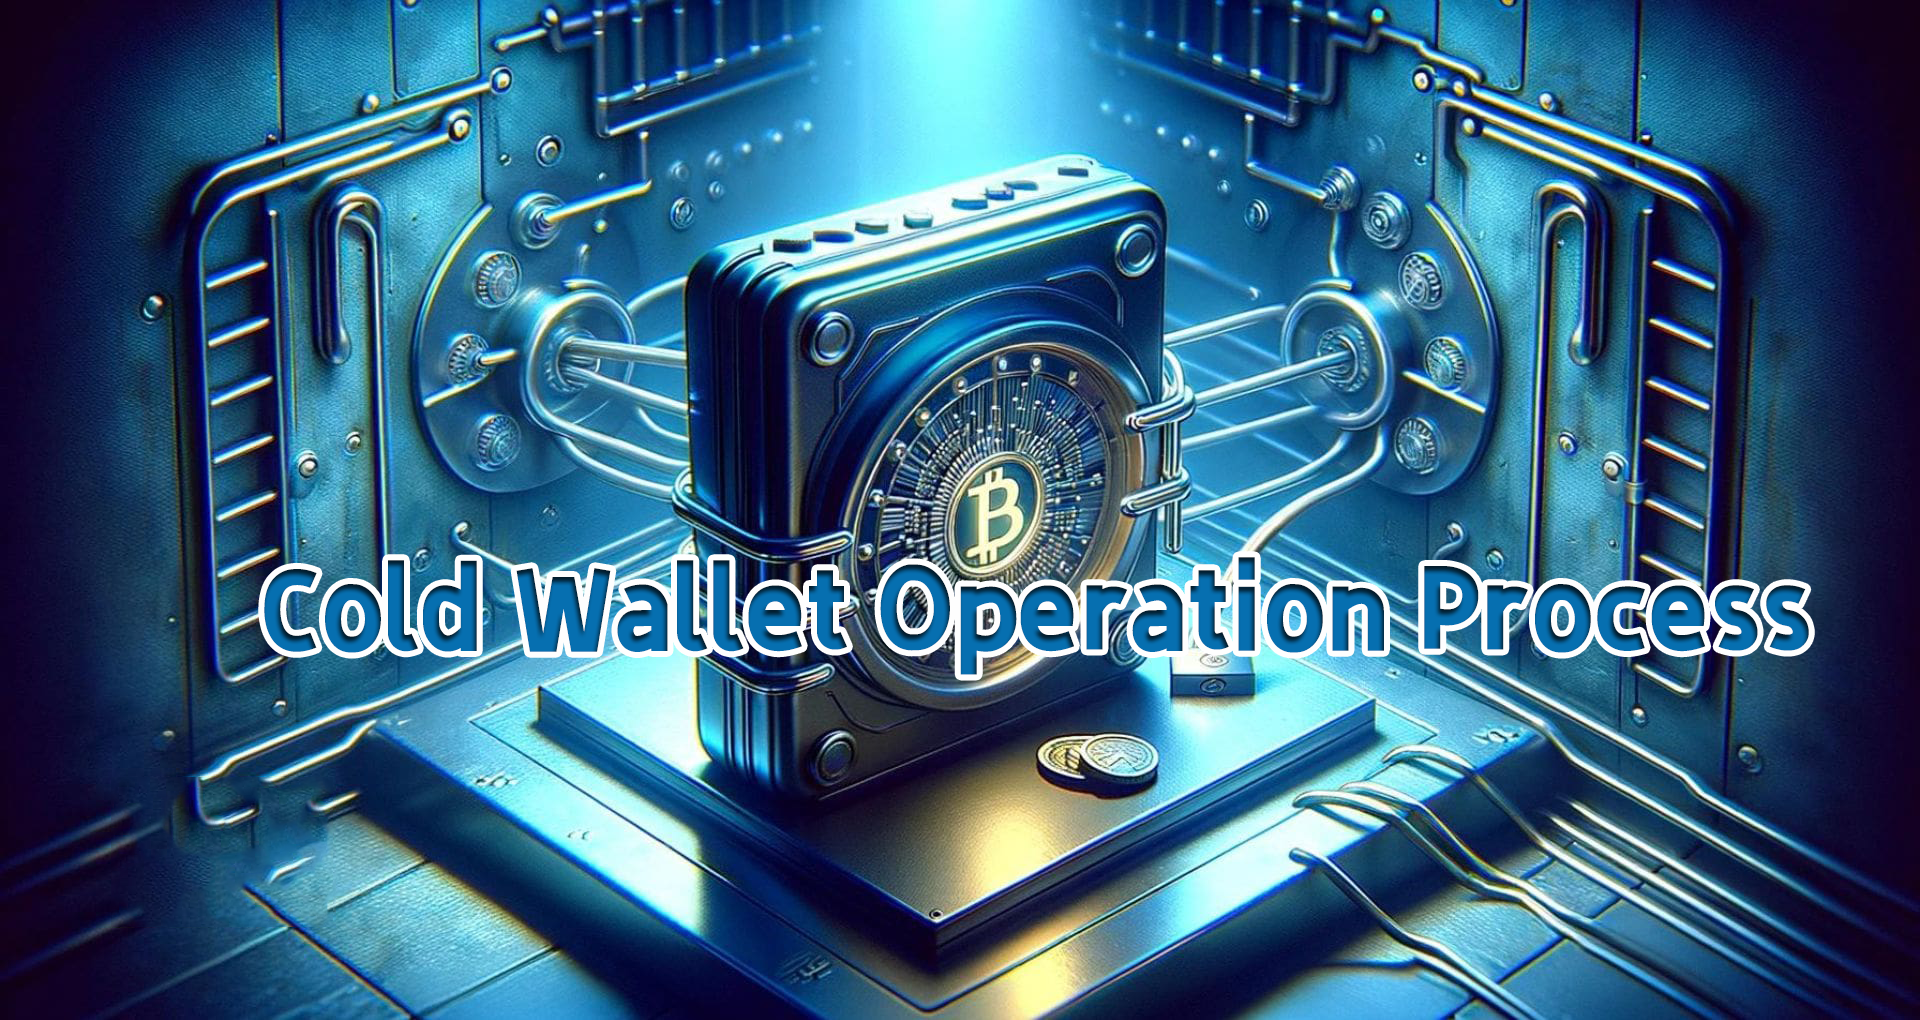 Cold Wallet Operation Process